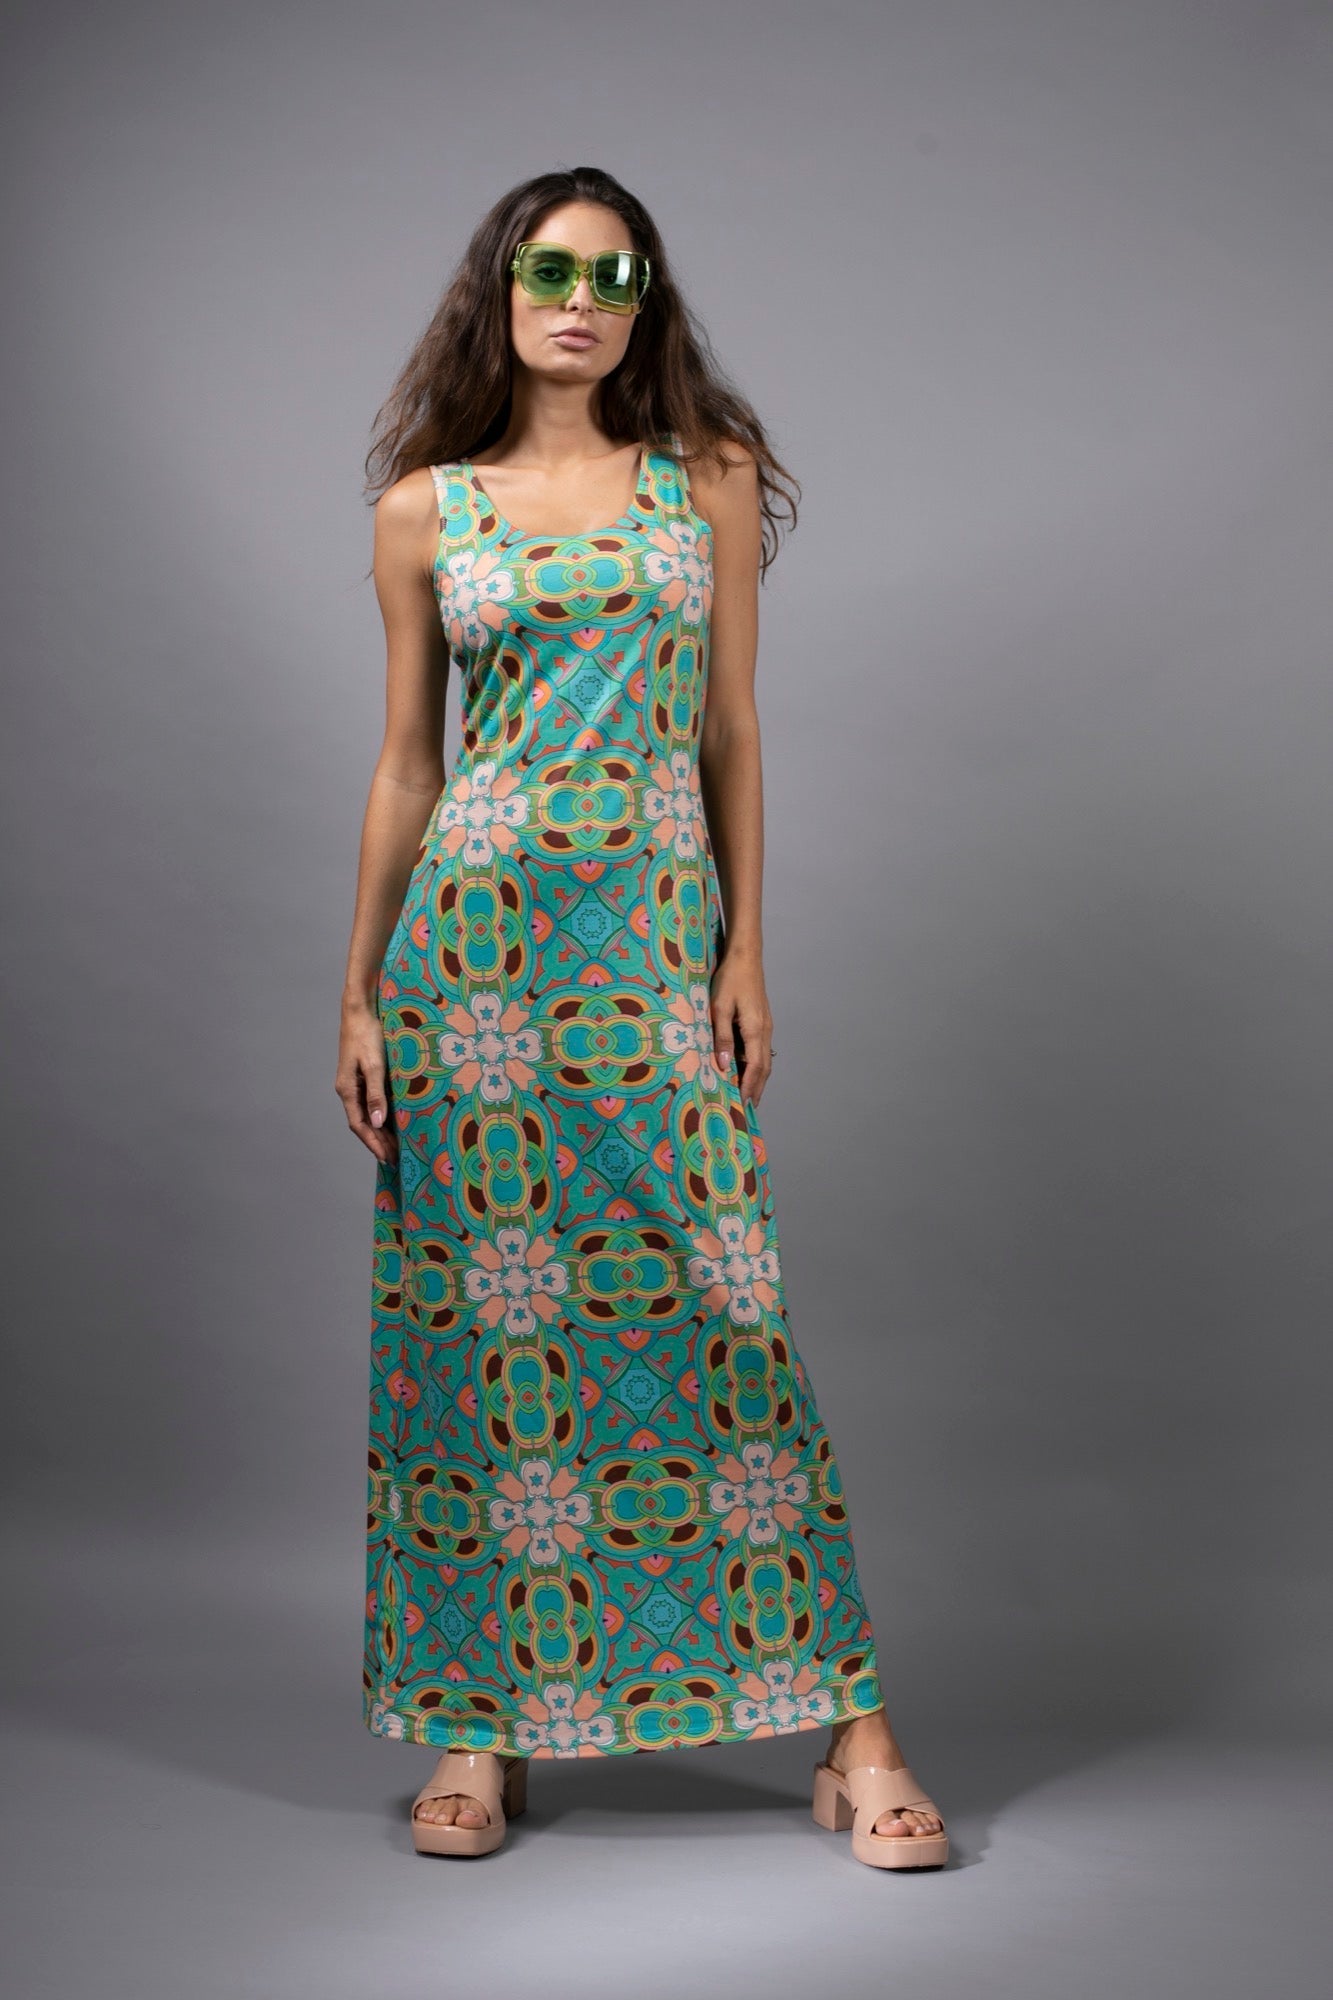 PSYCHEDELIC STAR TEAL-TANK MAXI DRESS